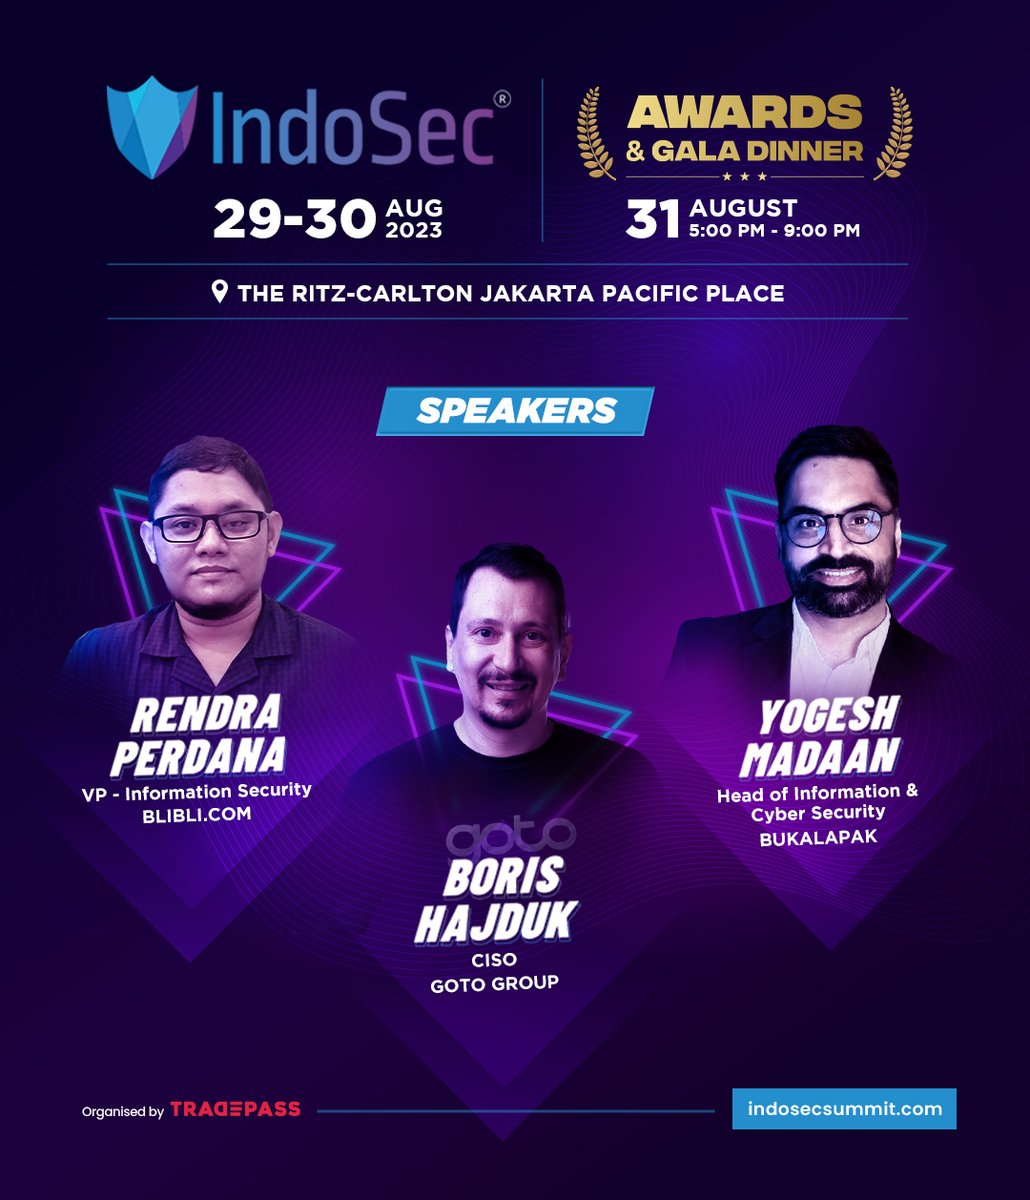 IndoSec 2023 is getting better and better with elite cybersecurity experts making it to our speaker line-up!
Register now to meet the experts: hubs.la/Q01VnVL30

#IndoSec2023 #IndoSec #cybersecurity #cyberdefence #networksecurity #zerotrustsecurity #cloudsecurity #tradepass